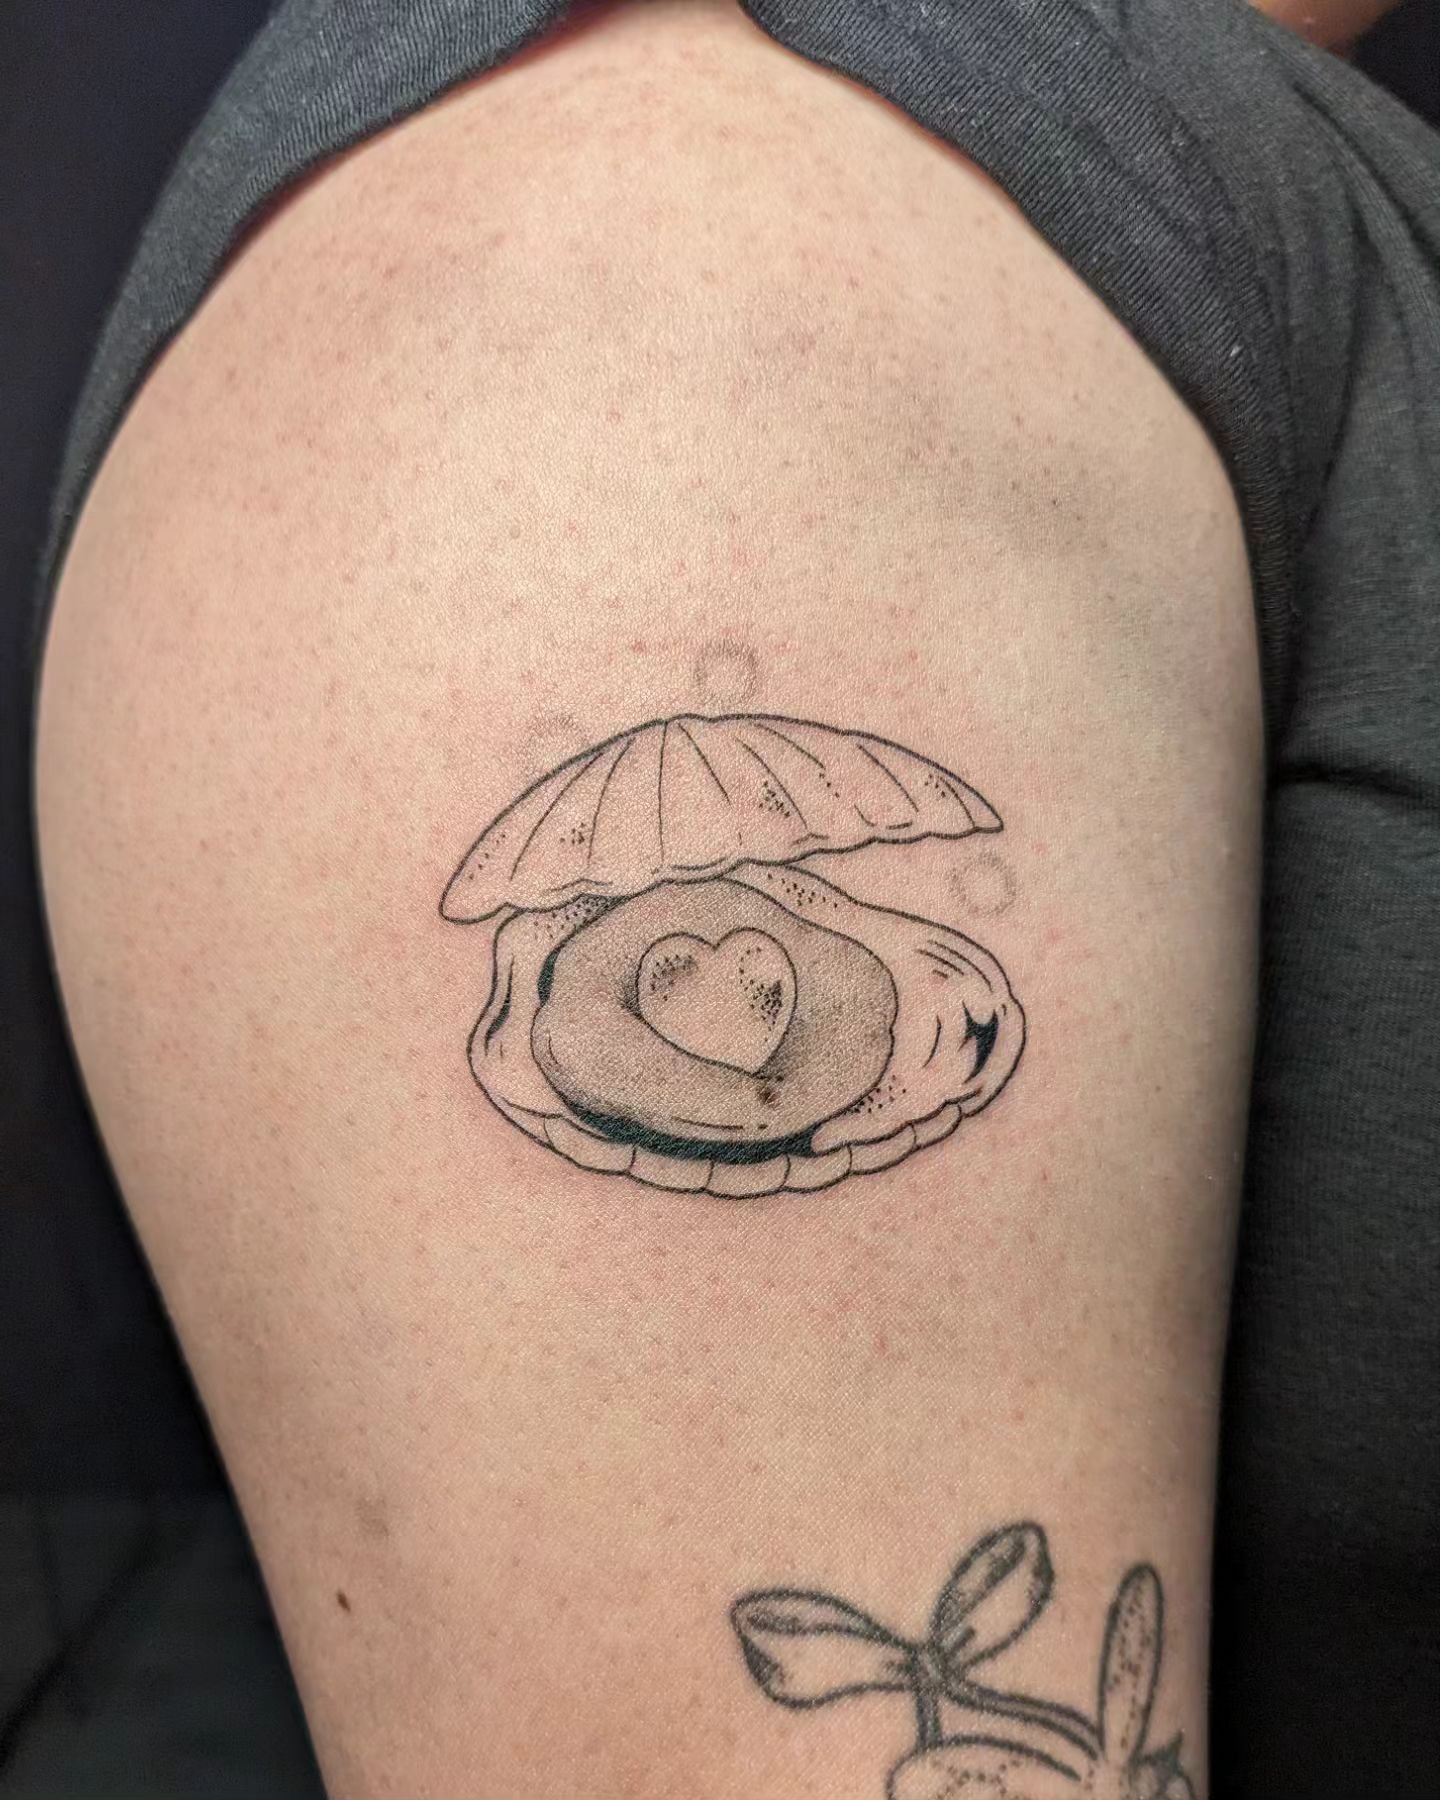 Almost forgot to post this spring flash. Thicker lines than my usual (:

.
.
.
.
.
.

#yyc #yycliving #yyctattoo #tattoo #tattoos #calgary #calgarytattoo #flash #flashtattoo #yycflash #finelinetattoo #finelineyyc #illustration #cute #cutetattoo #clam